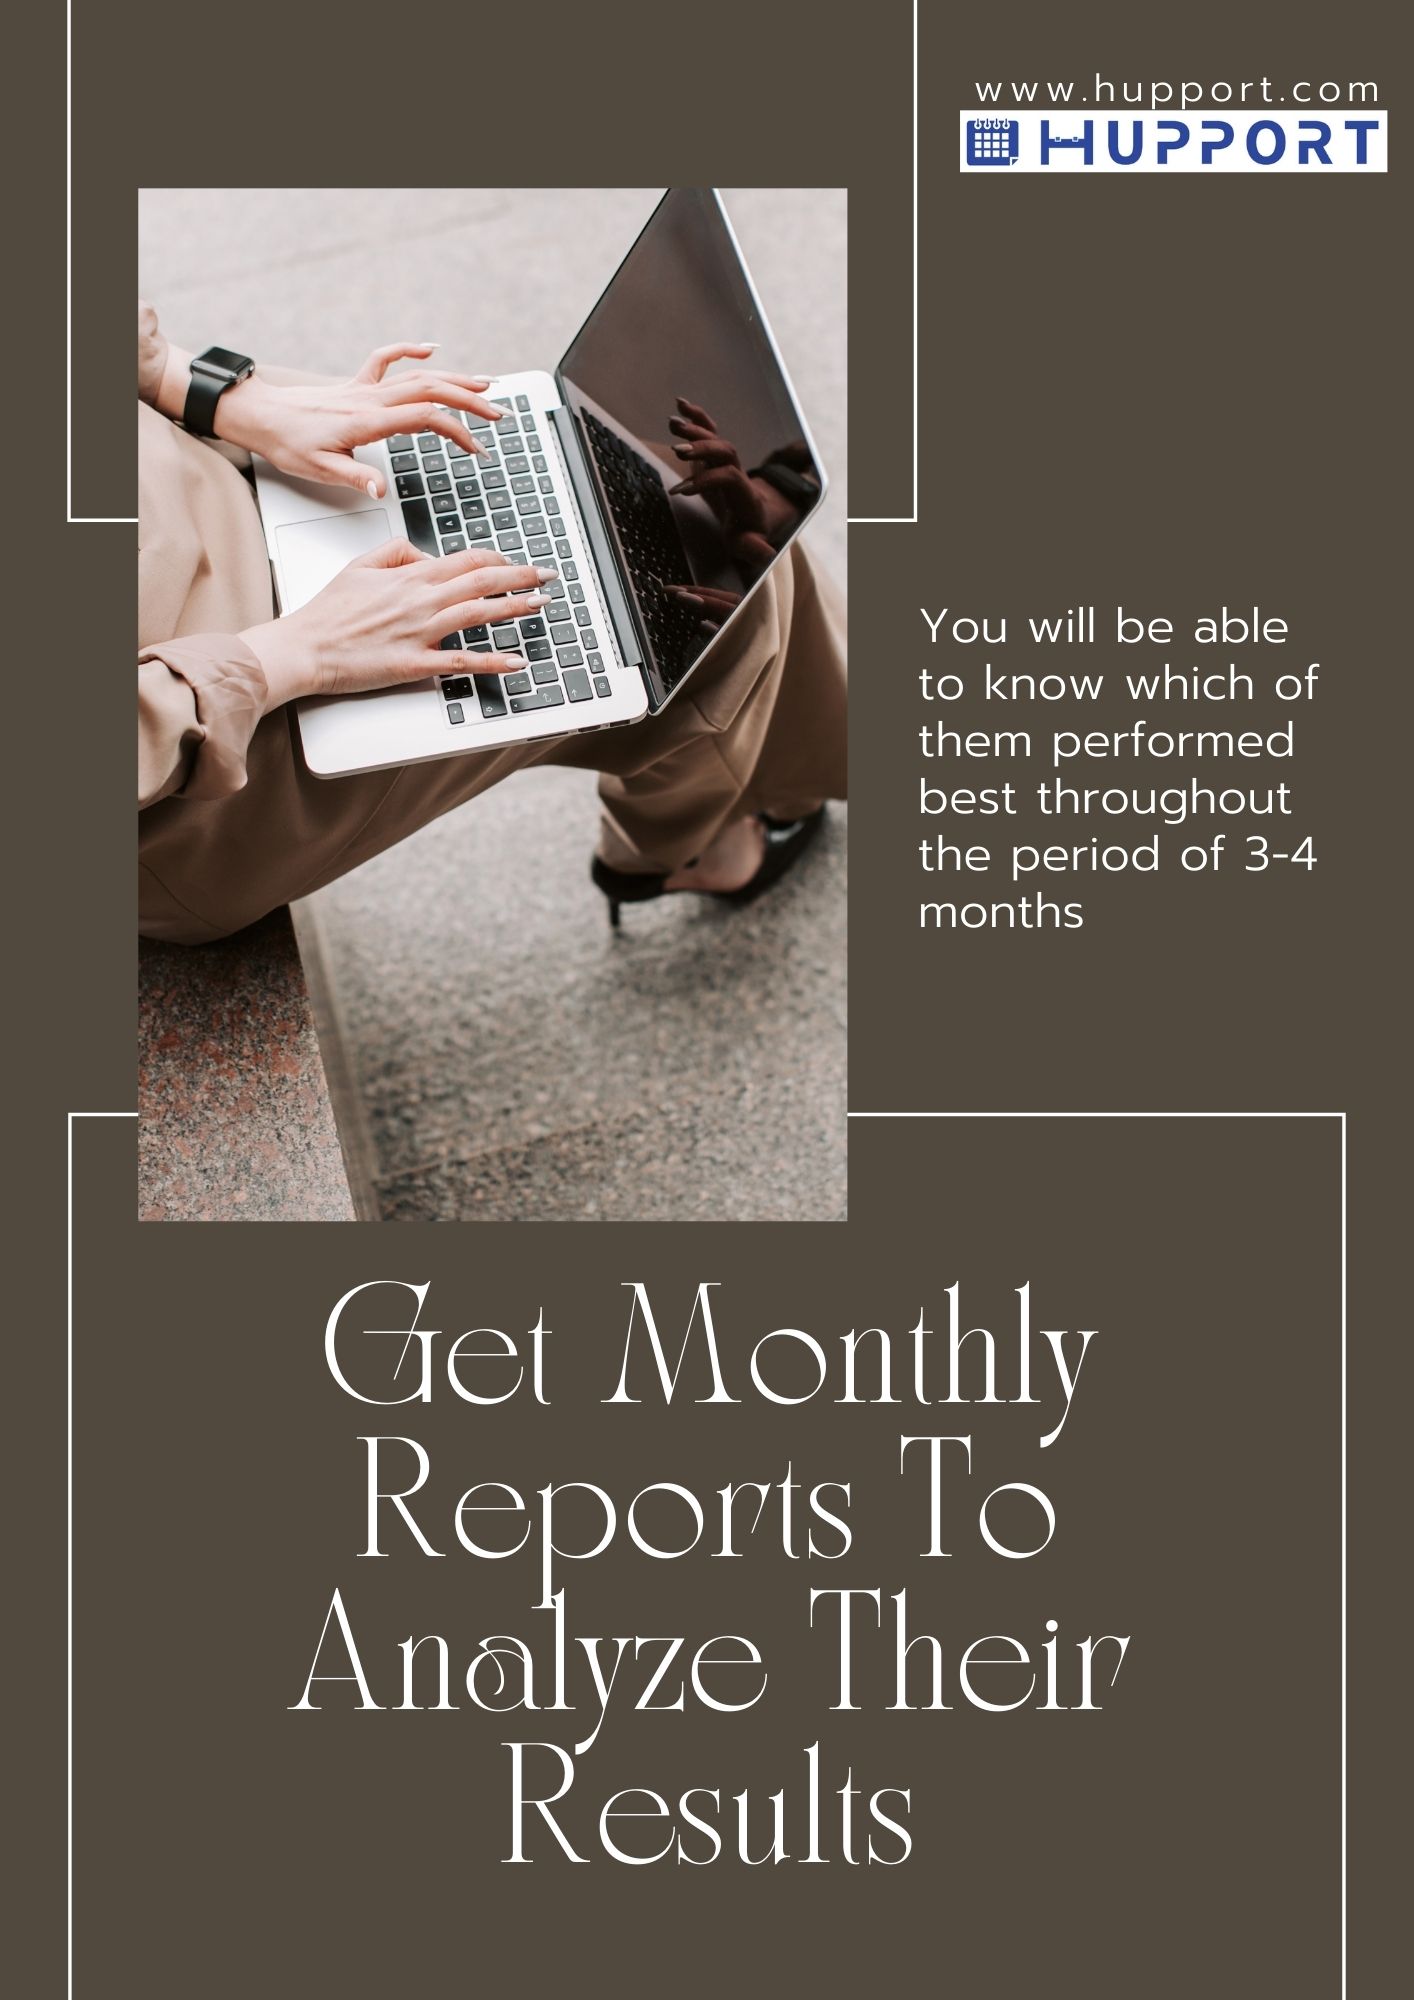 Get Monthly Reports To Analyze Their Results